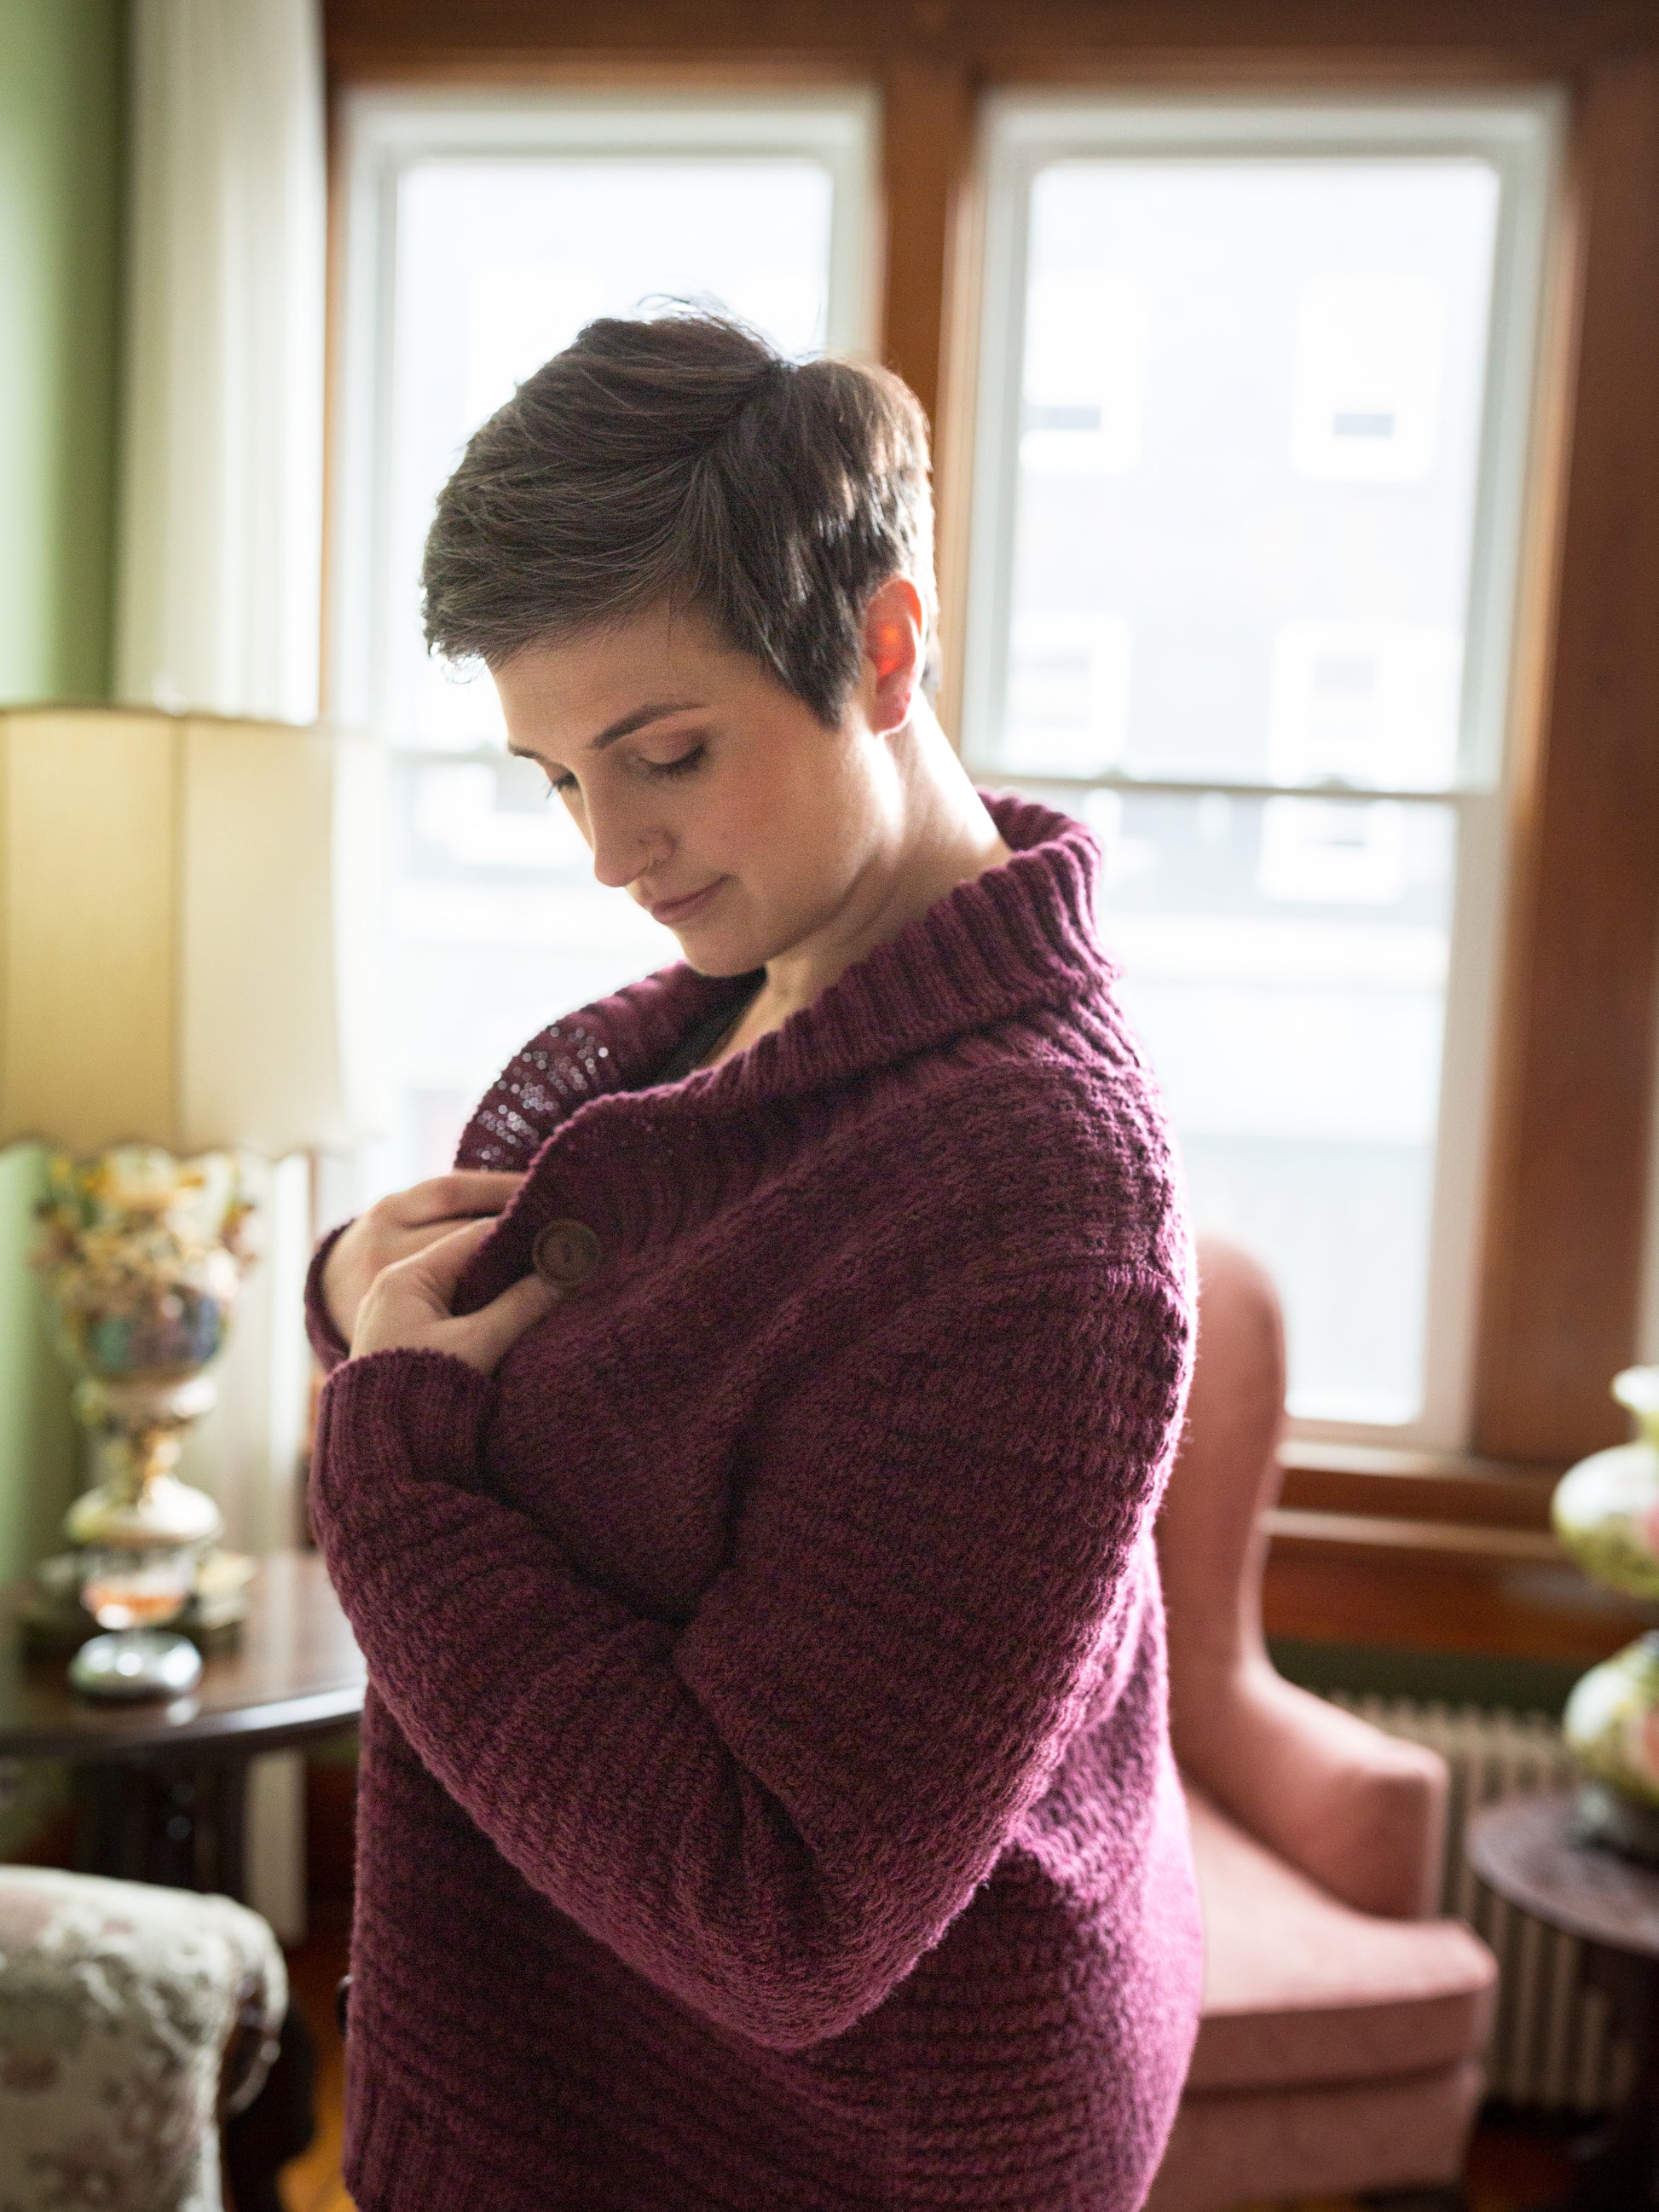 Seen from the side, Jen wears a cardigan, knit with a cowl neck and a subtle allover stitch. A window and an antique lamp can be seen in the background.